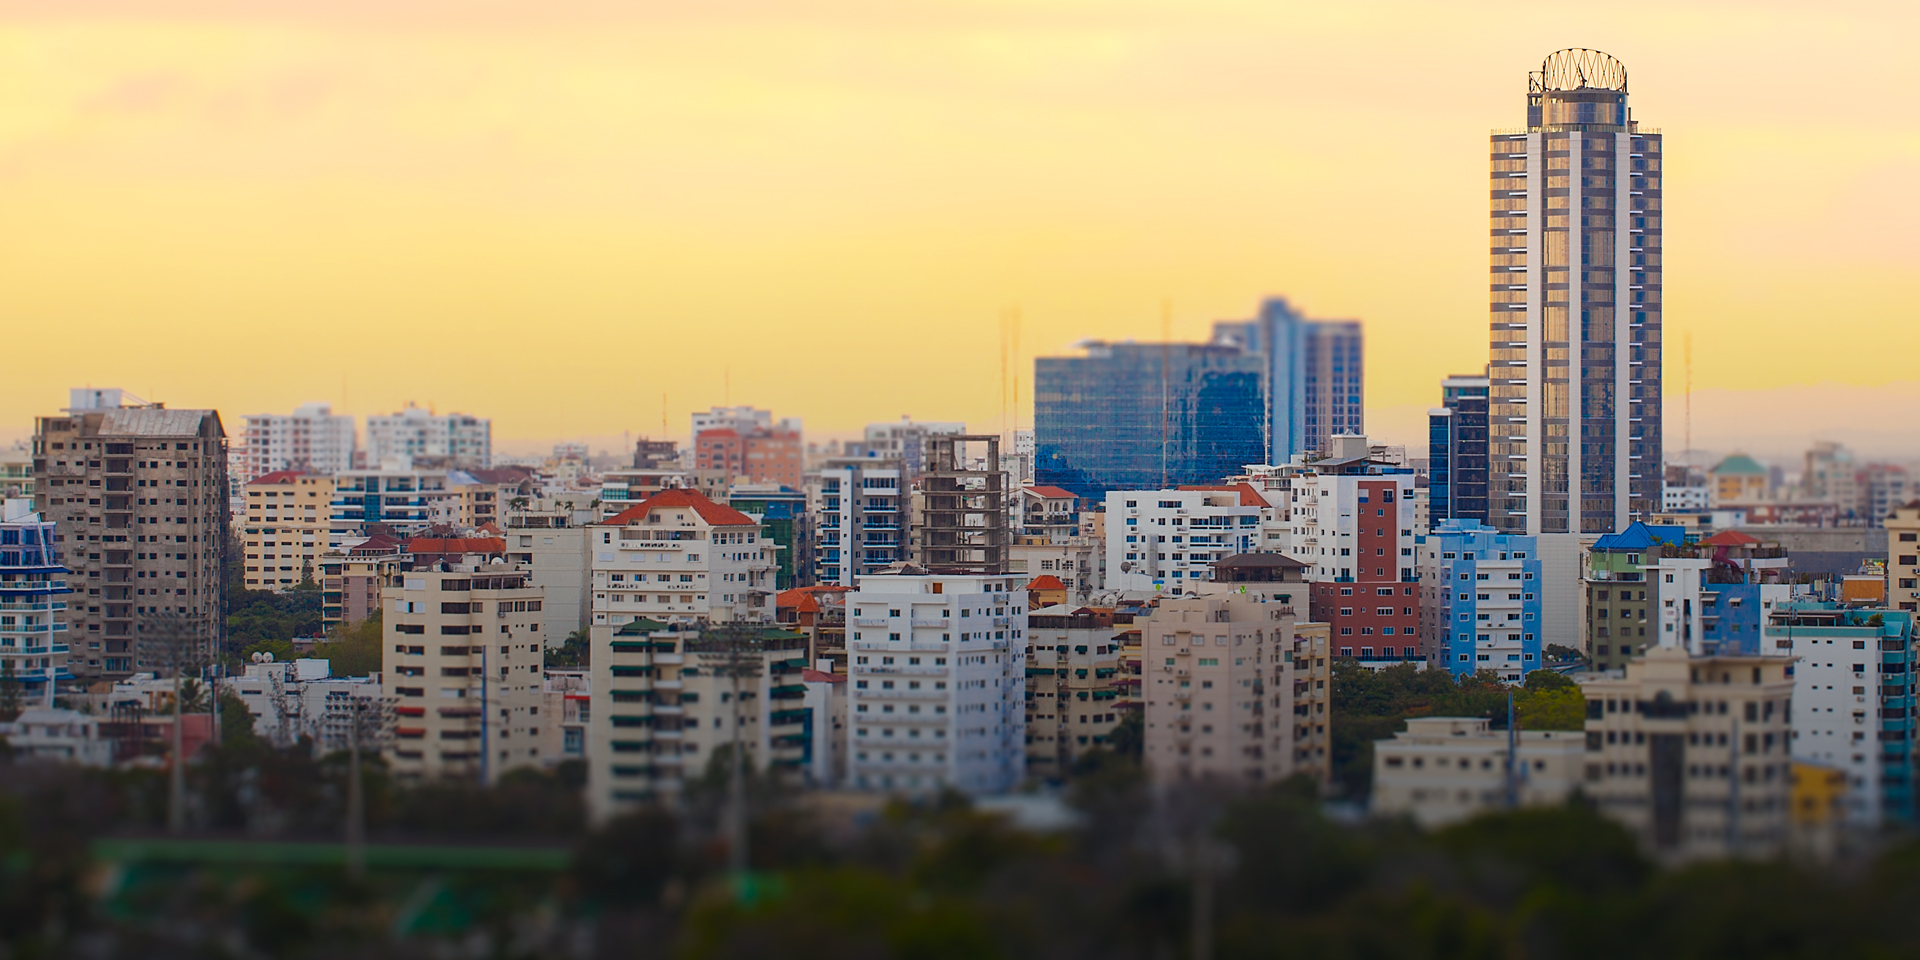 A city skyline with several colorful buildings dotting the landscape.